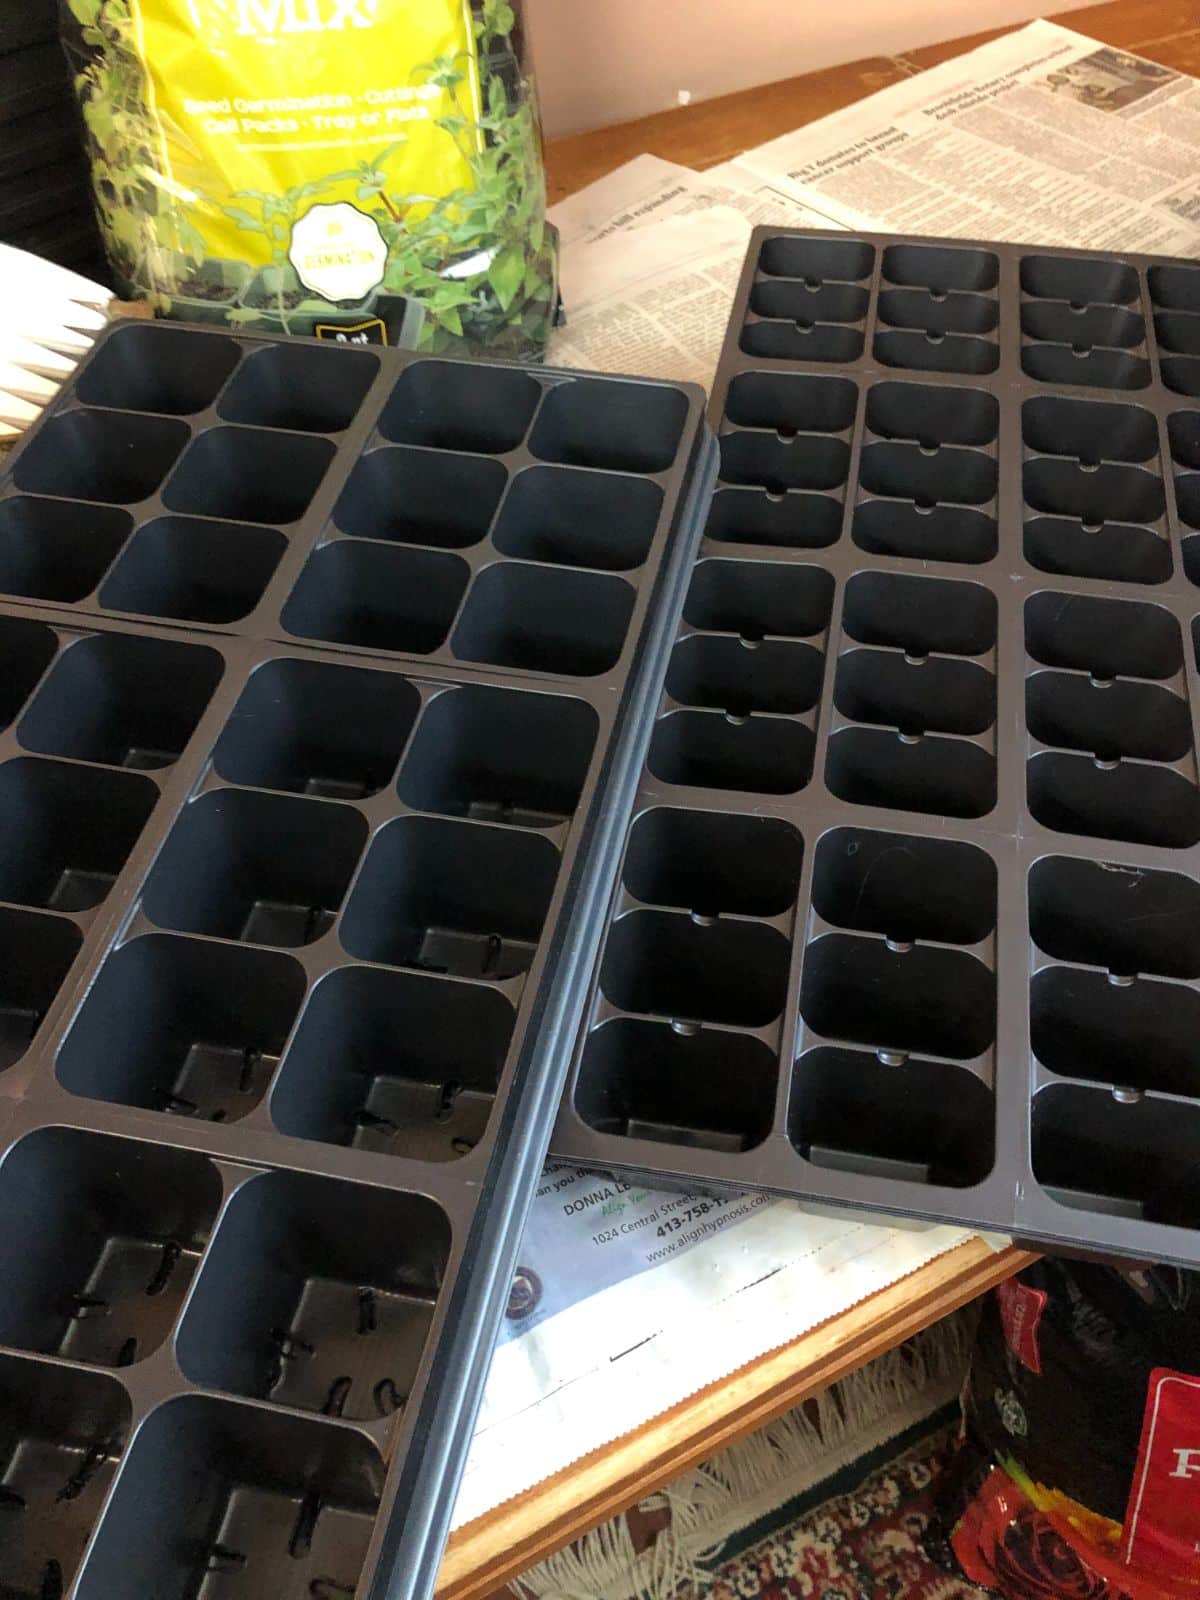 New sheets of cell packs ready for planting and up-potting